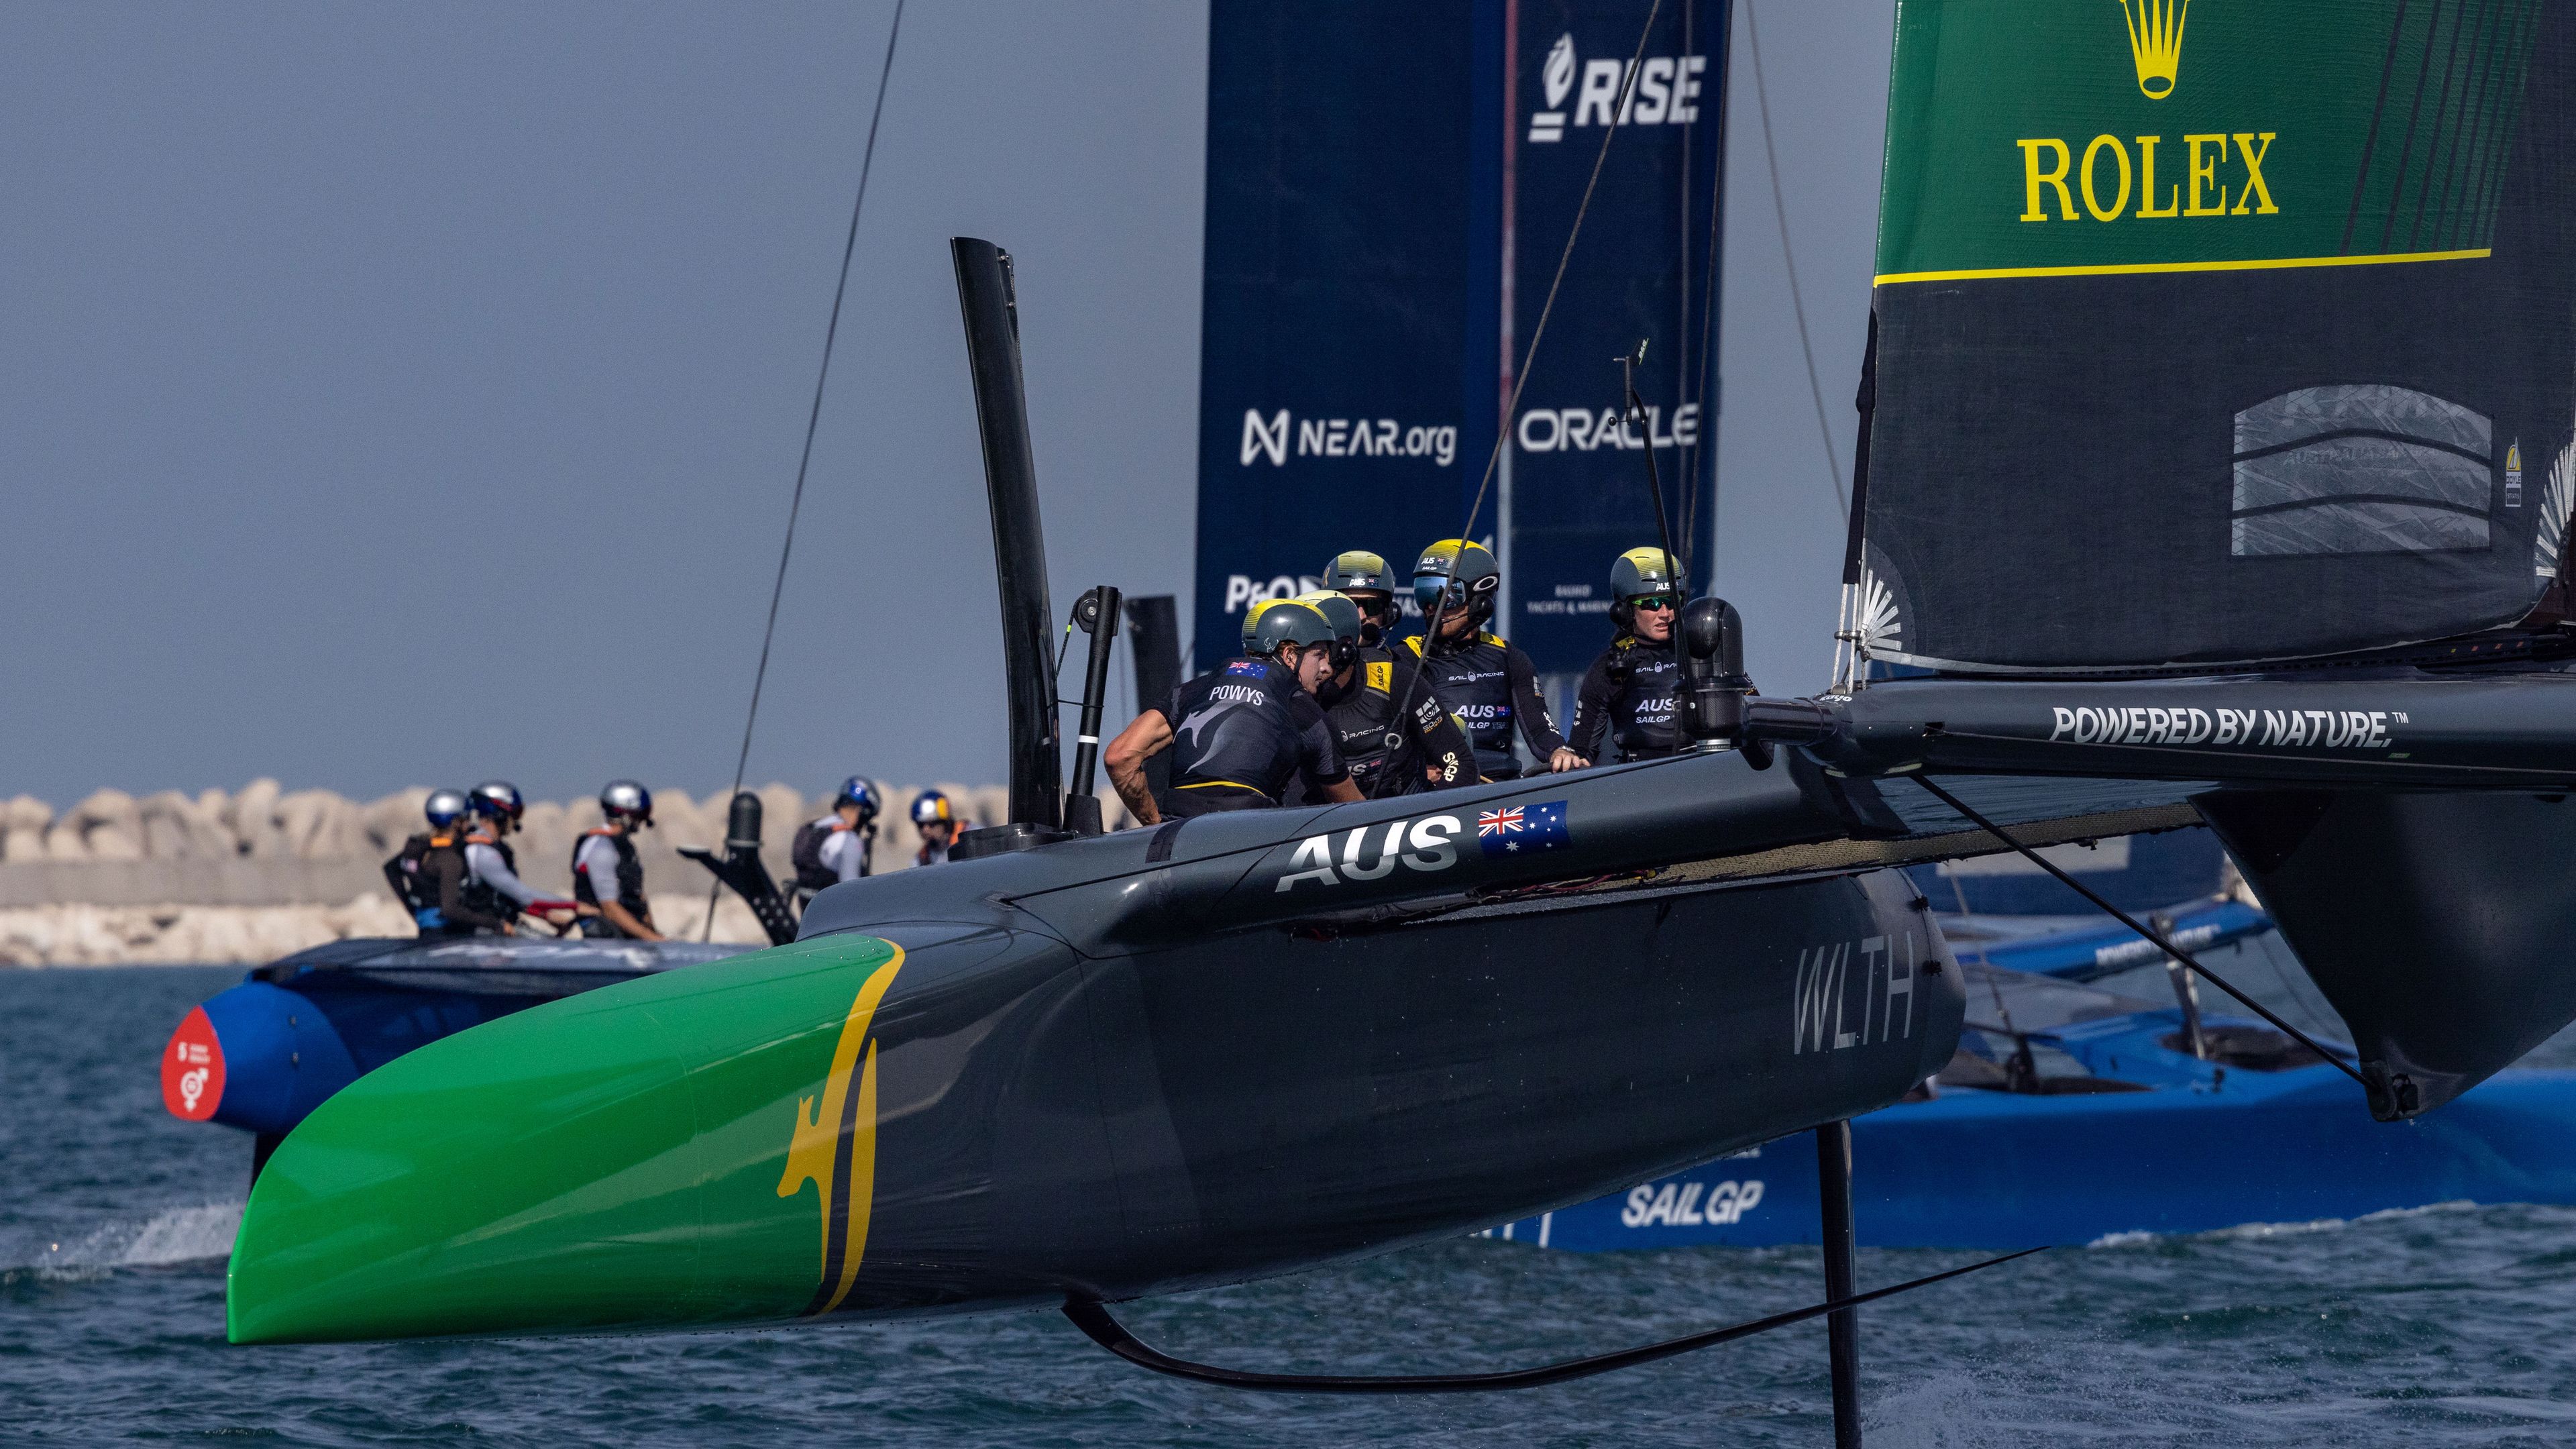 'Carnage' tipped for Dubai's inaugural SailGP race weekend as 'scary' course raises eyebrows